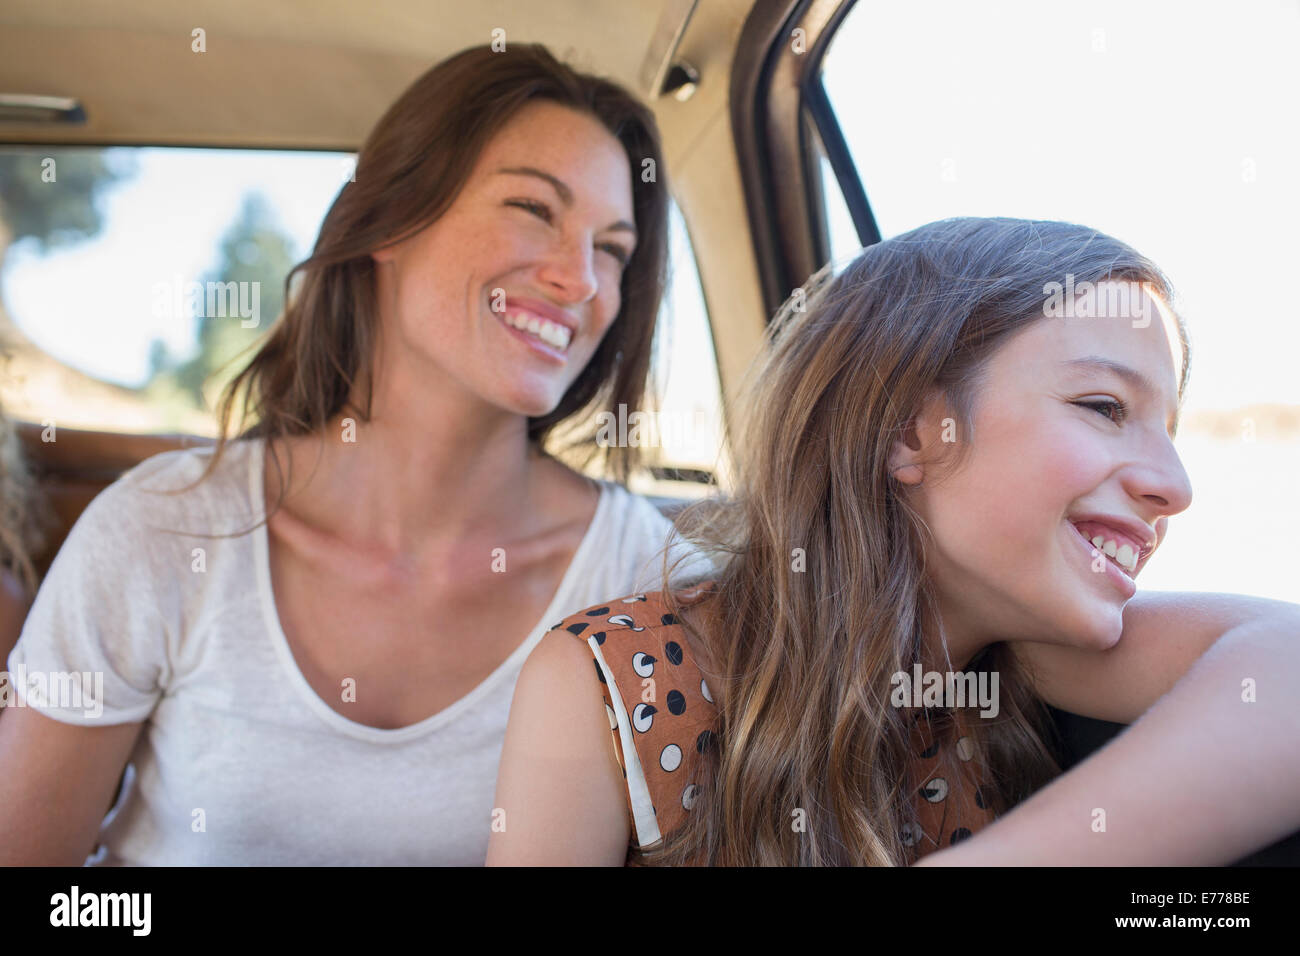 Sisters riding in car backseat together Stock Photo